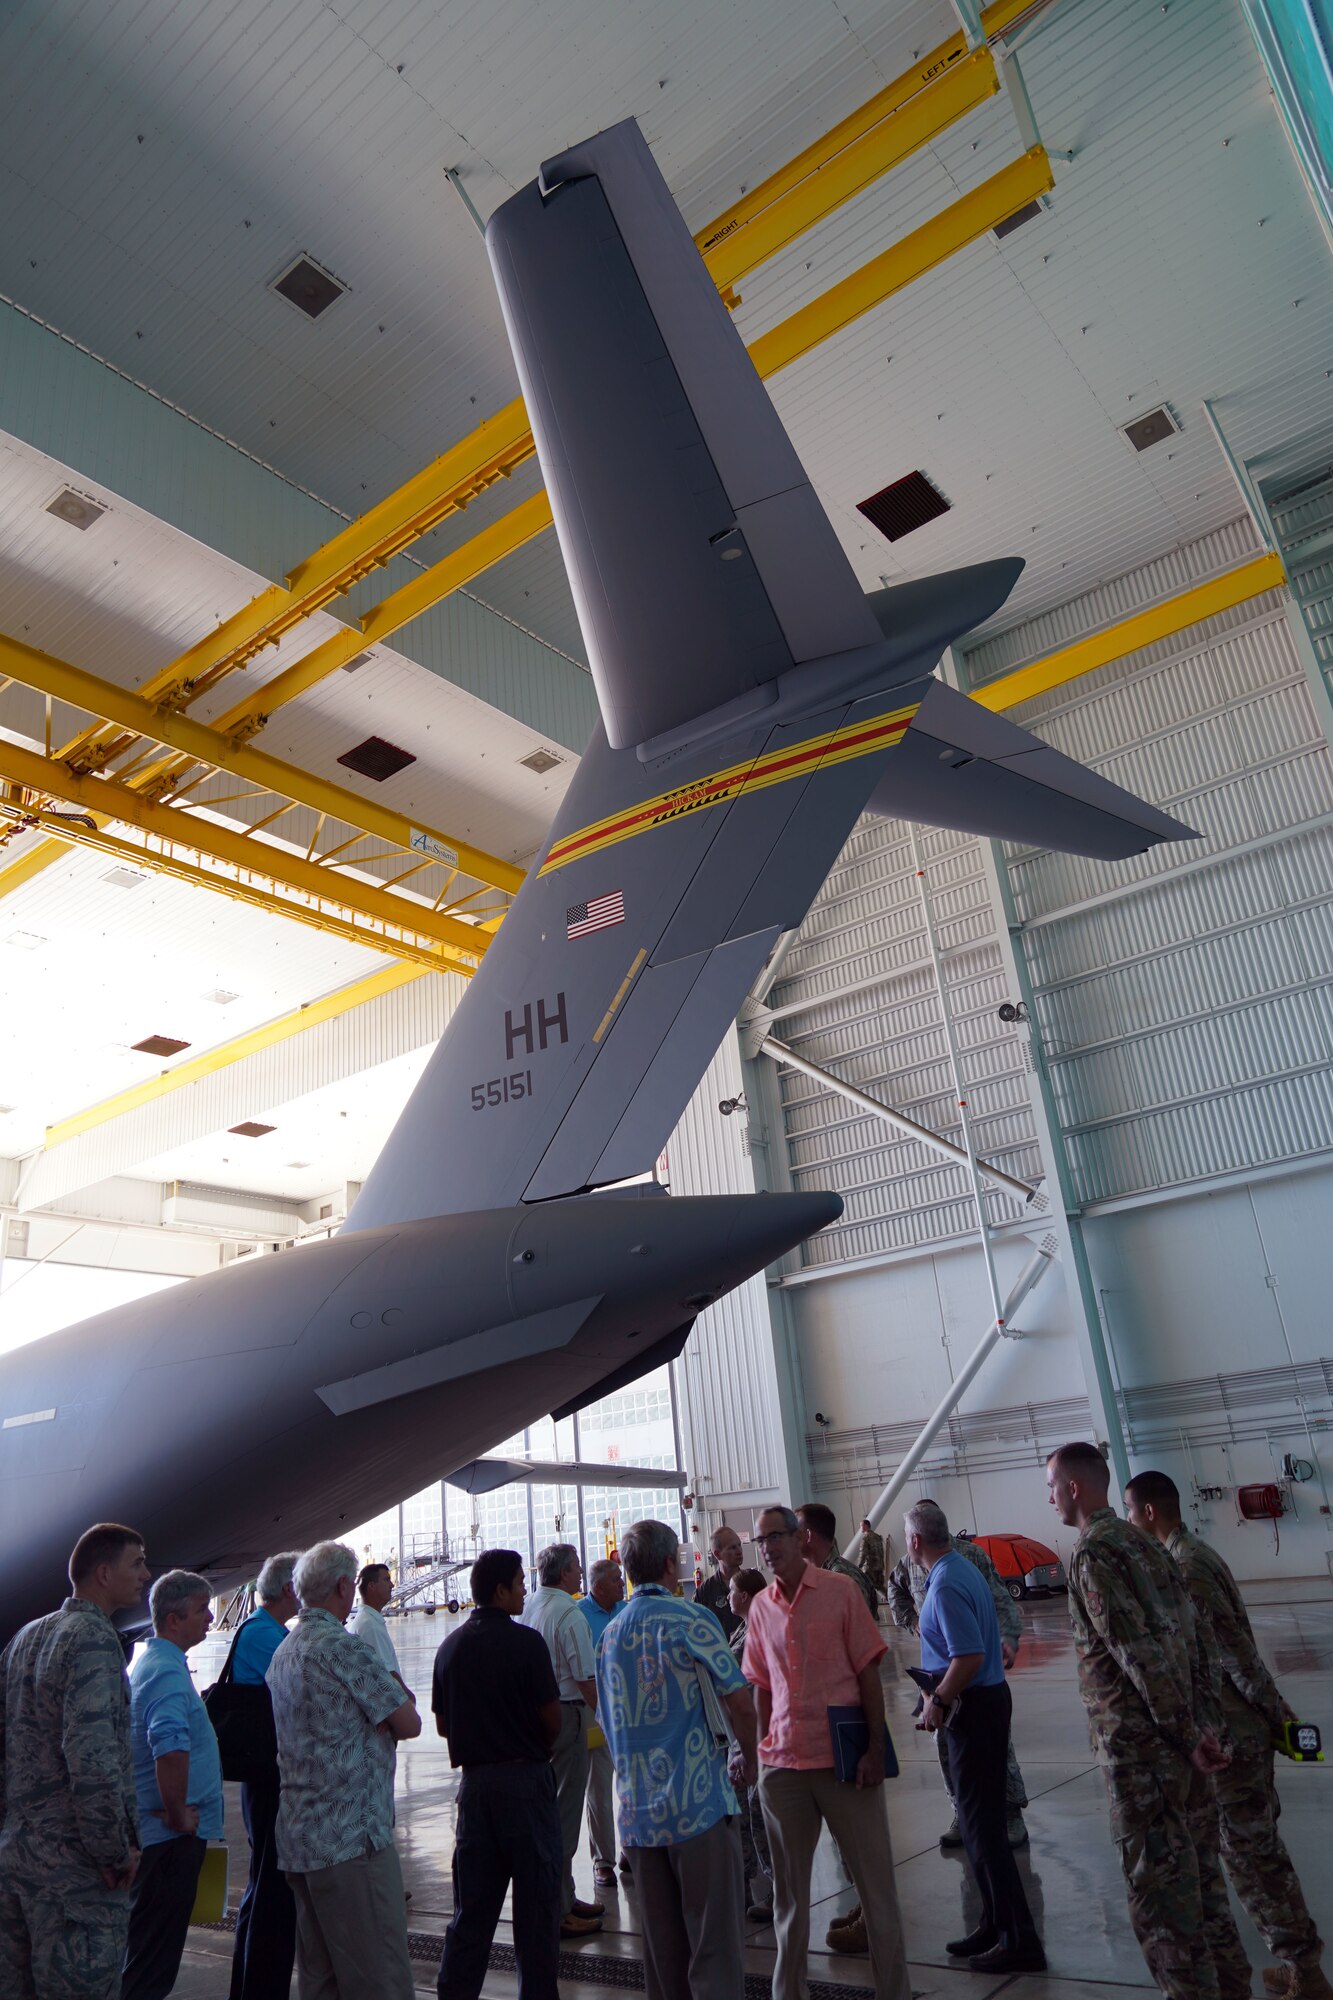 The National Commission on Military Aviation view Hangar 21 at Joint Base Pearl Harbor-Hickam, Hawaii, Nov. 1, 2019. The intention of the NCMAS is to be able to make recommendations on safety, training, maintenance and personnel in the military to Congress. The visit to Hickam was significant due to the active duty and guard Total Force Integration of Hickam Airfield. (U.S. Air Force photo by Airman 1st Class Erin Baxter)